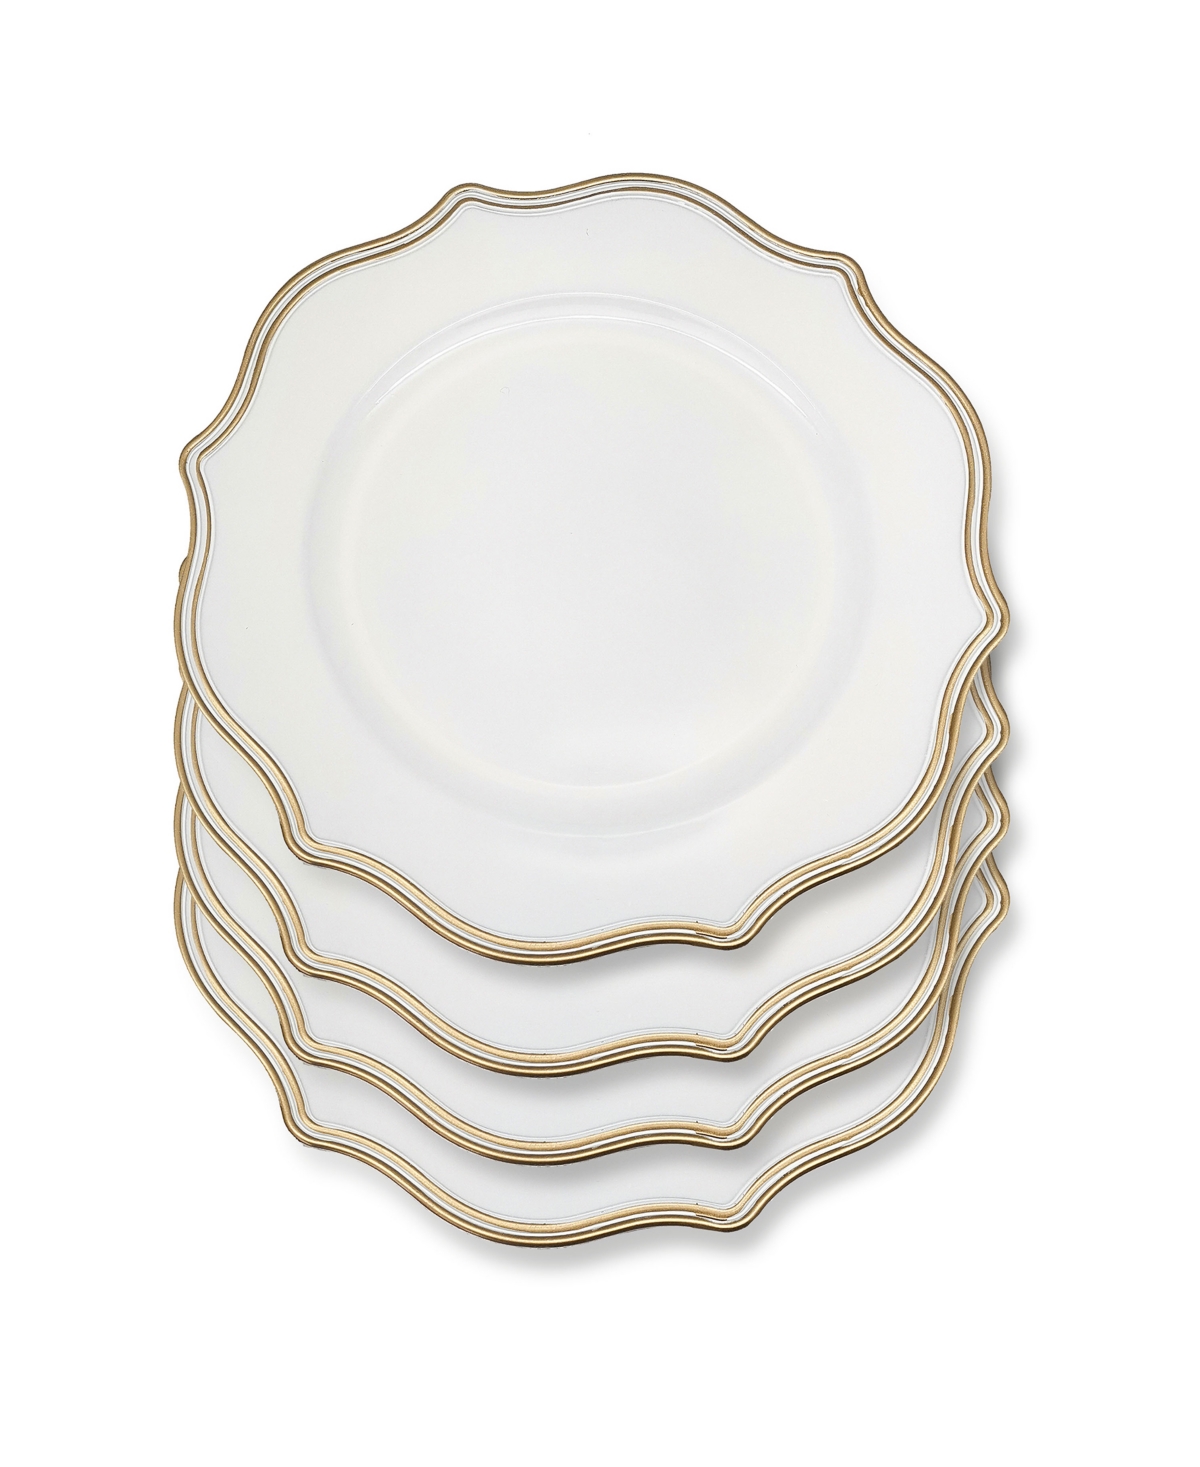 American Atelier Lacey Charger Plates 13" Set, 4 Pieces In White